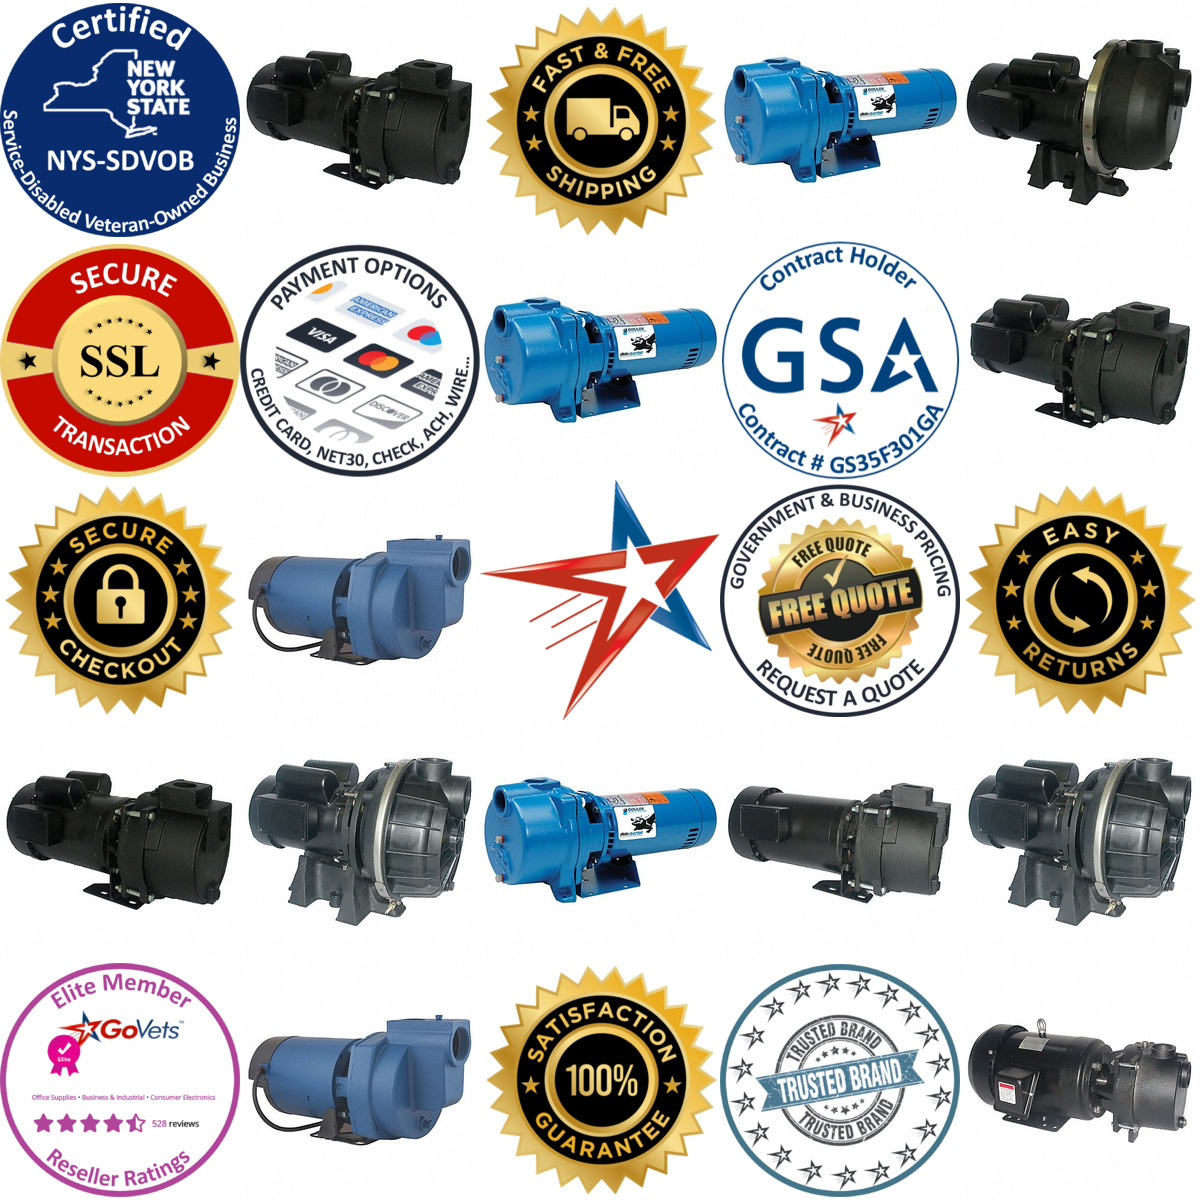 A selection of Sprinkler Pumps products on GoVets